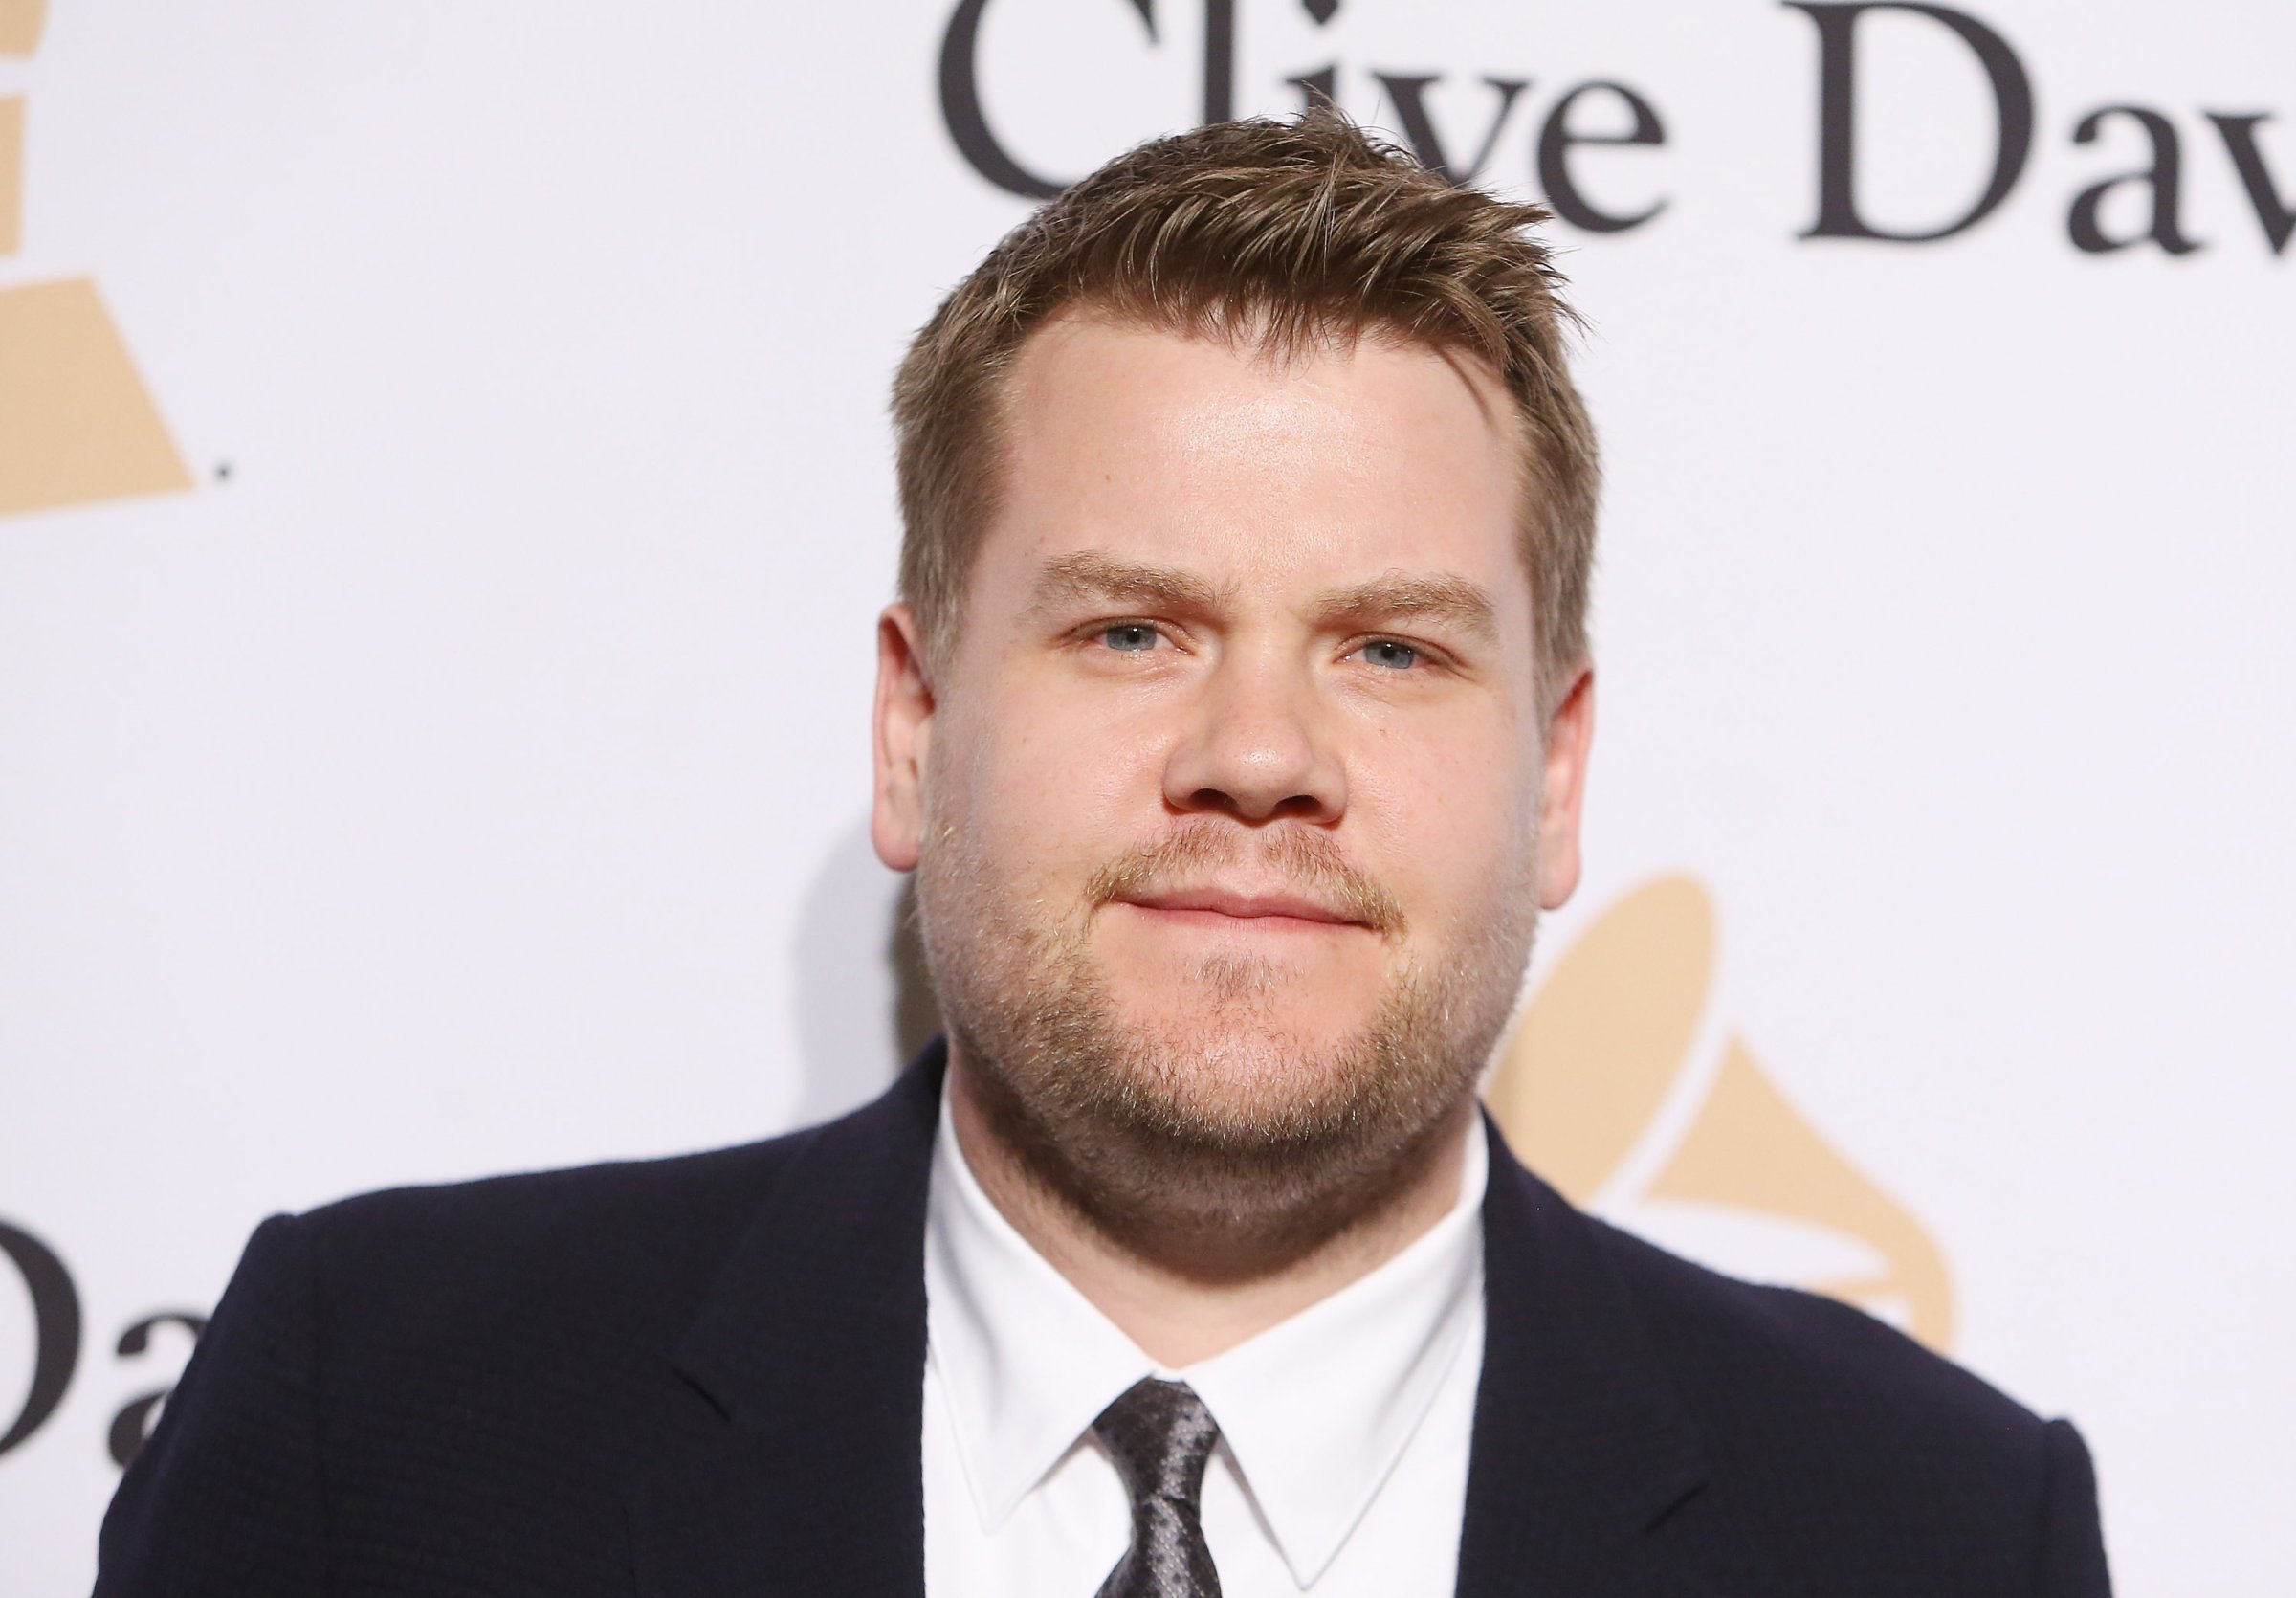 James Corden arrives at the 2016 Pre-GRAMMY Gala and Salute to Industry Icons honoring Irving Azoff held at The Beverly Hilton Hotel on February 14, 2016 in Beverly Hills, California.